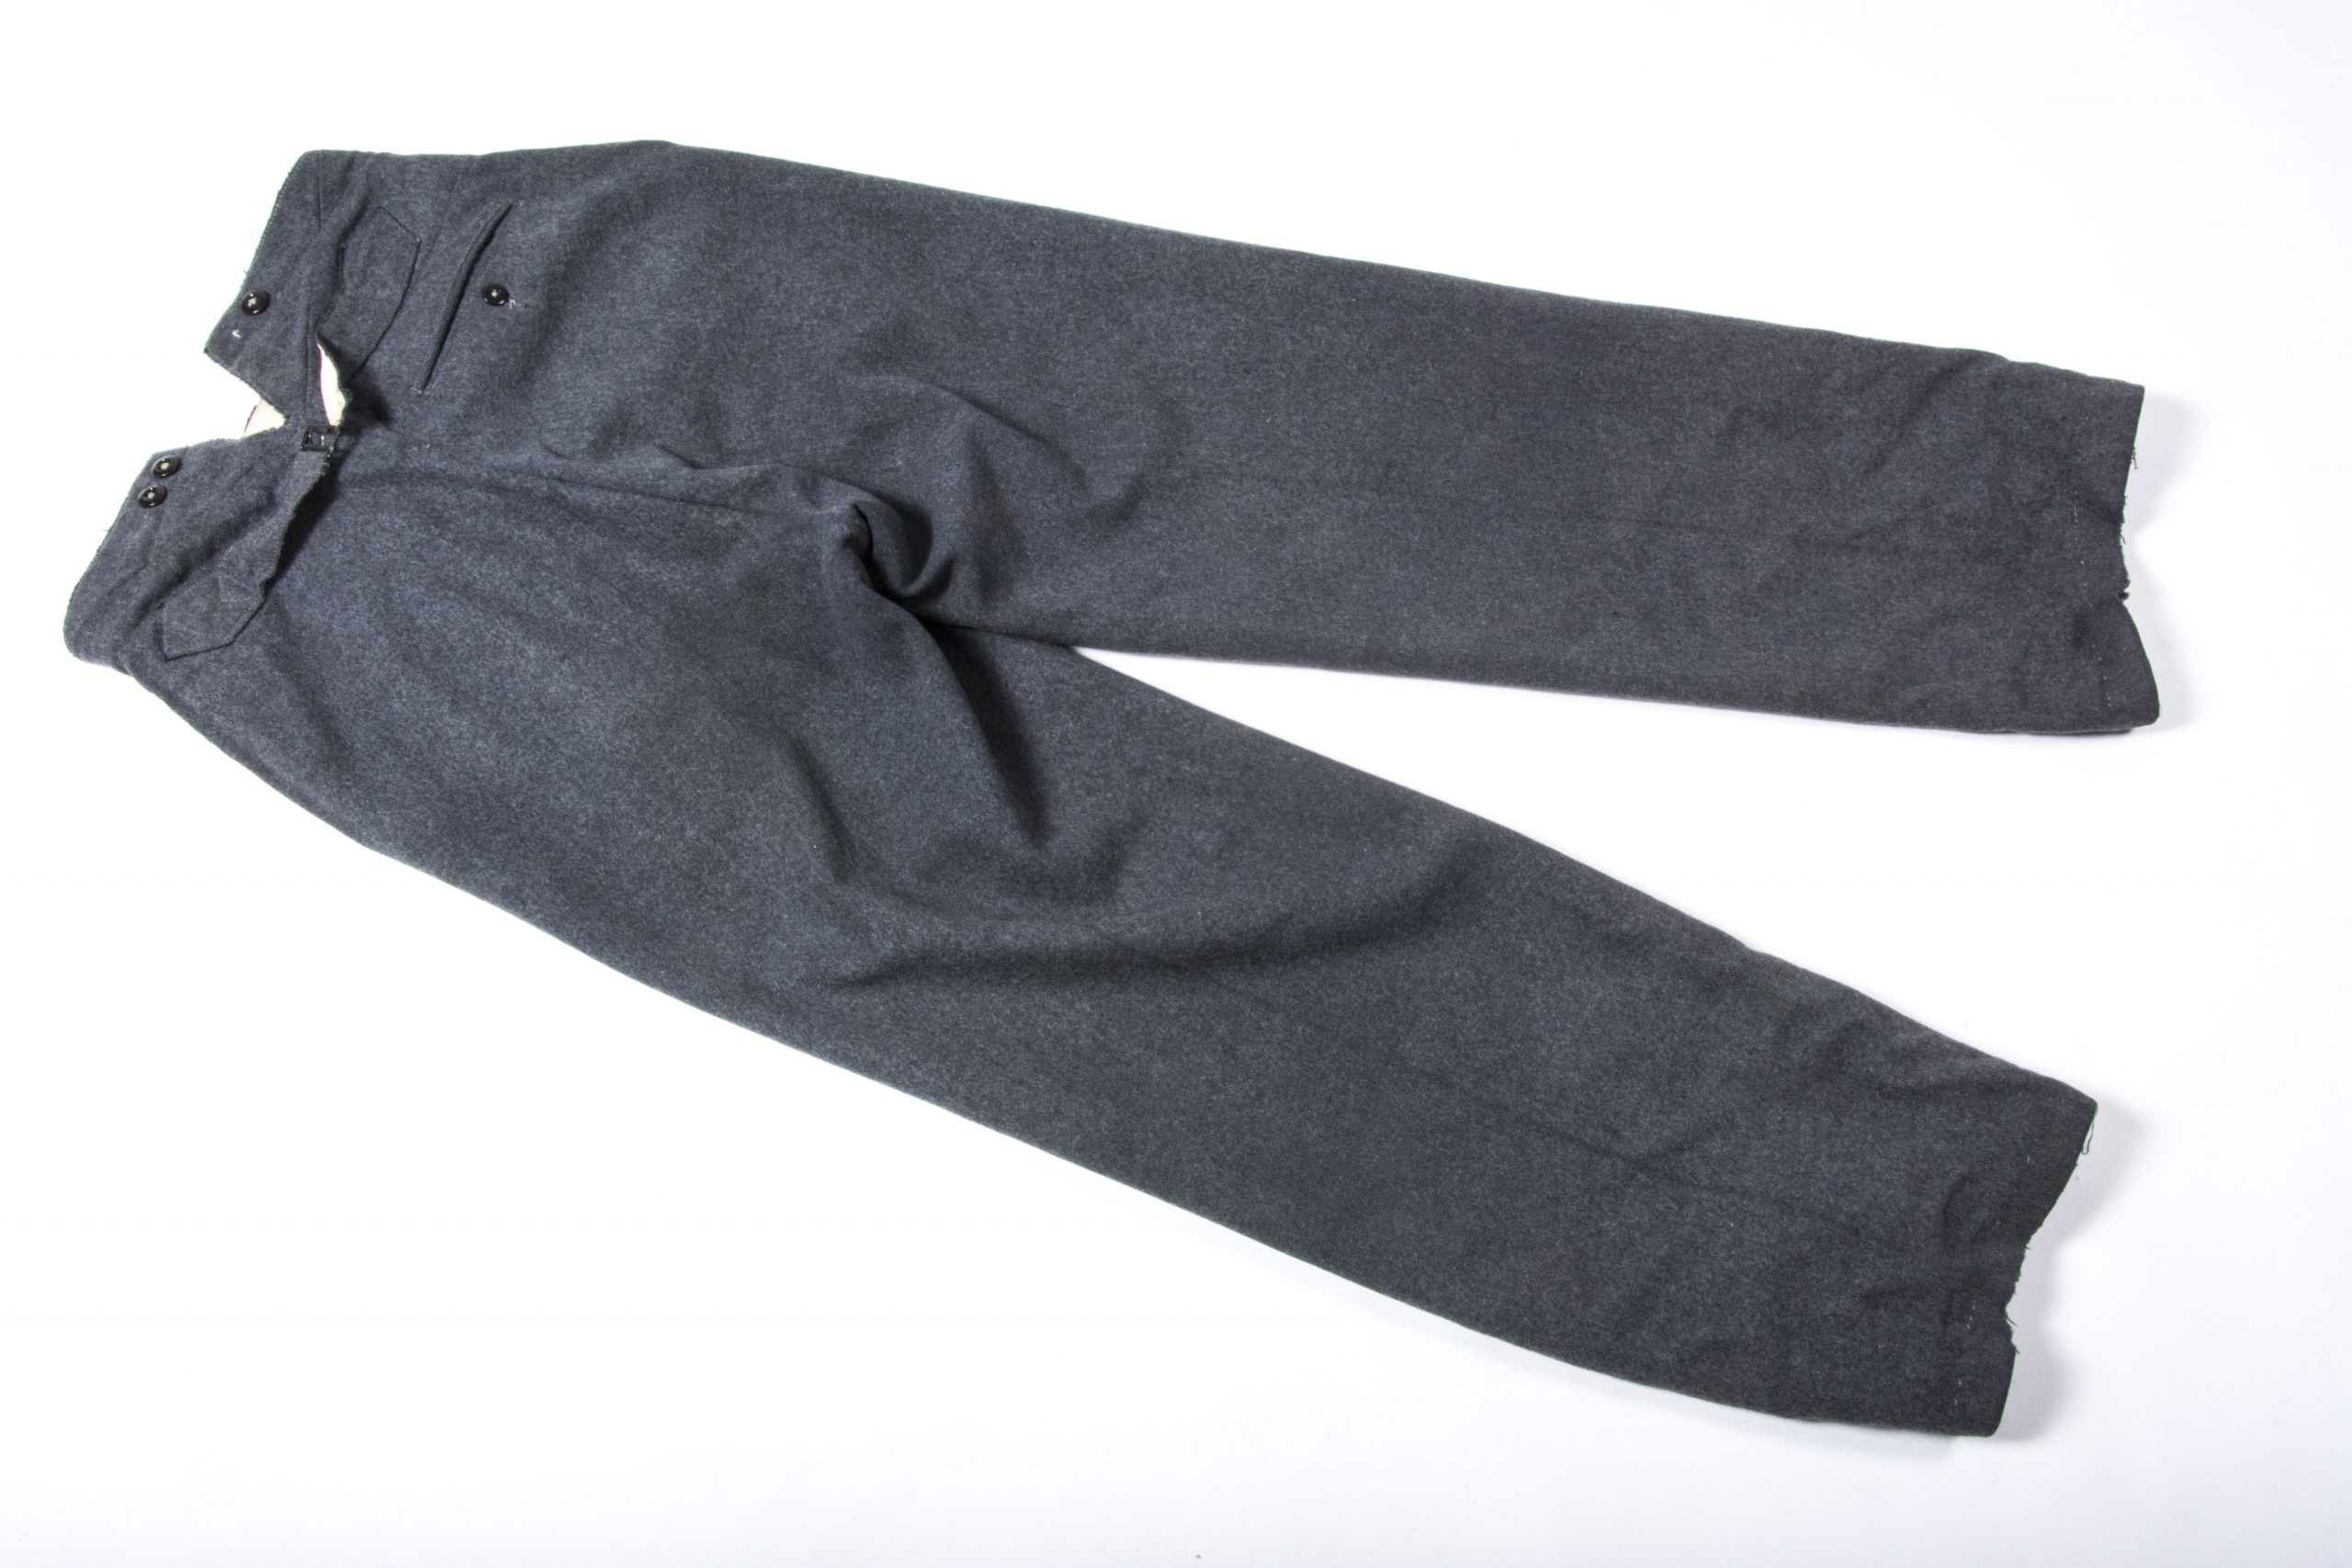 Luftwaffe M40 trousers in good worn condition – fjm44